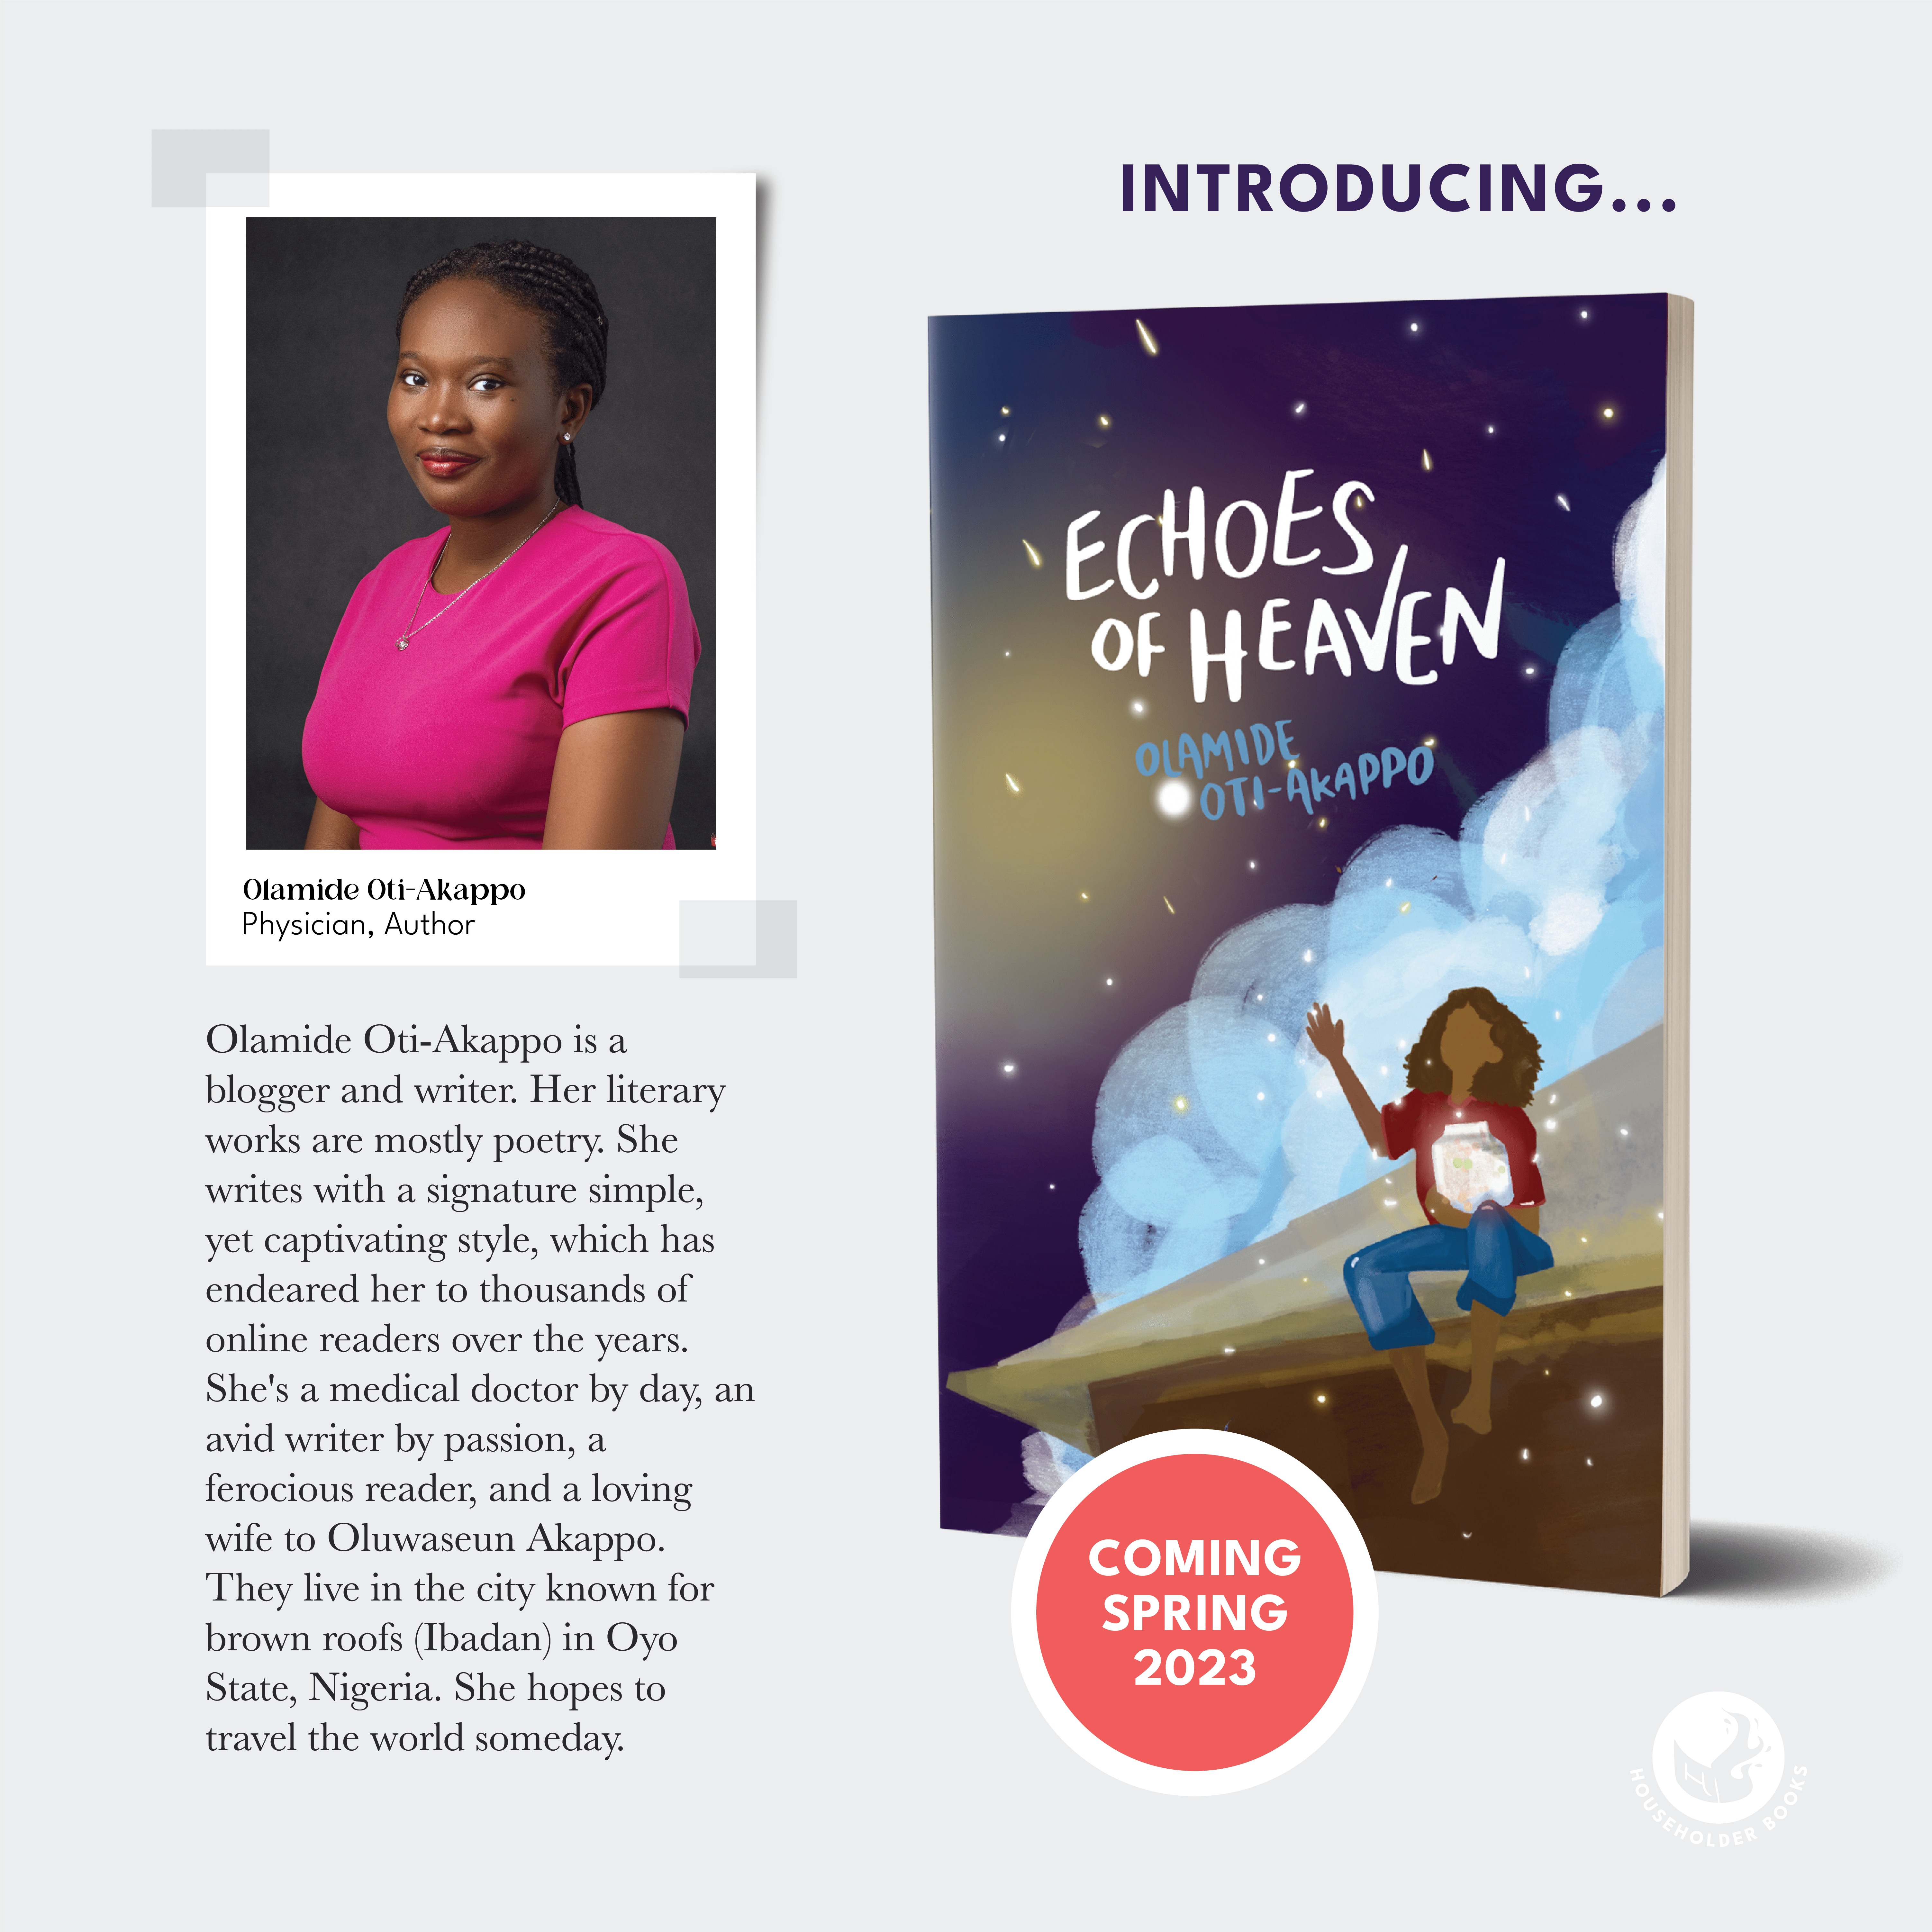 “Echoes of Heaven” poetry book announced